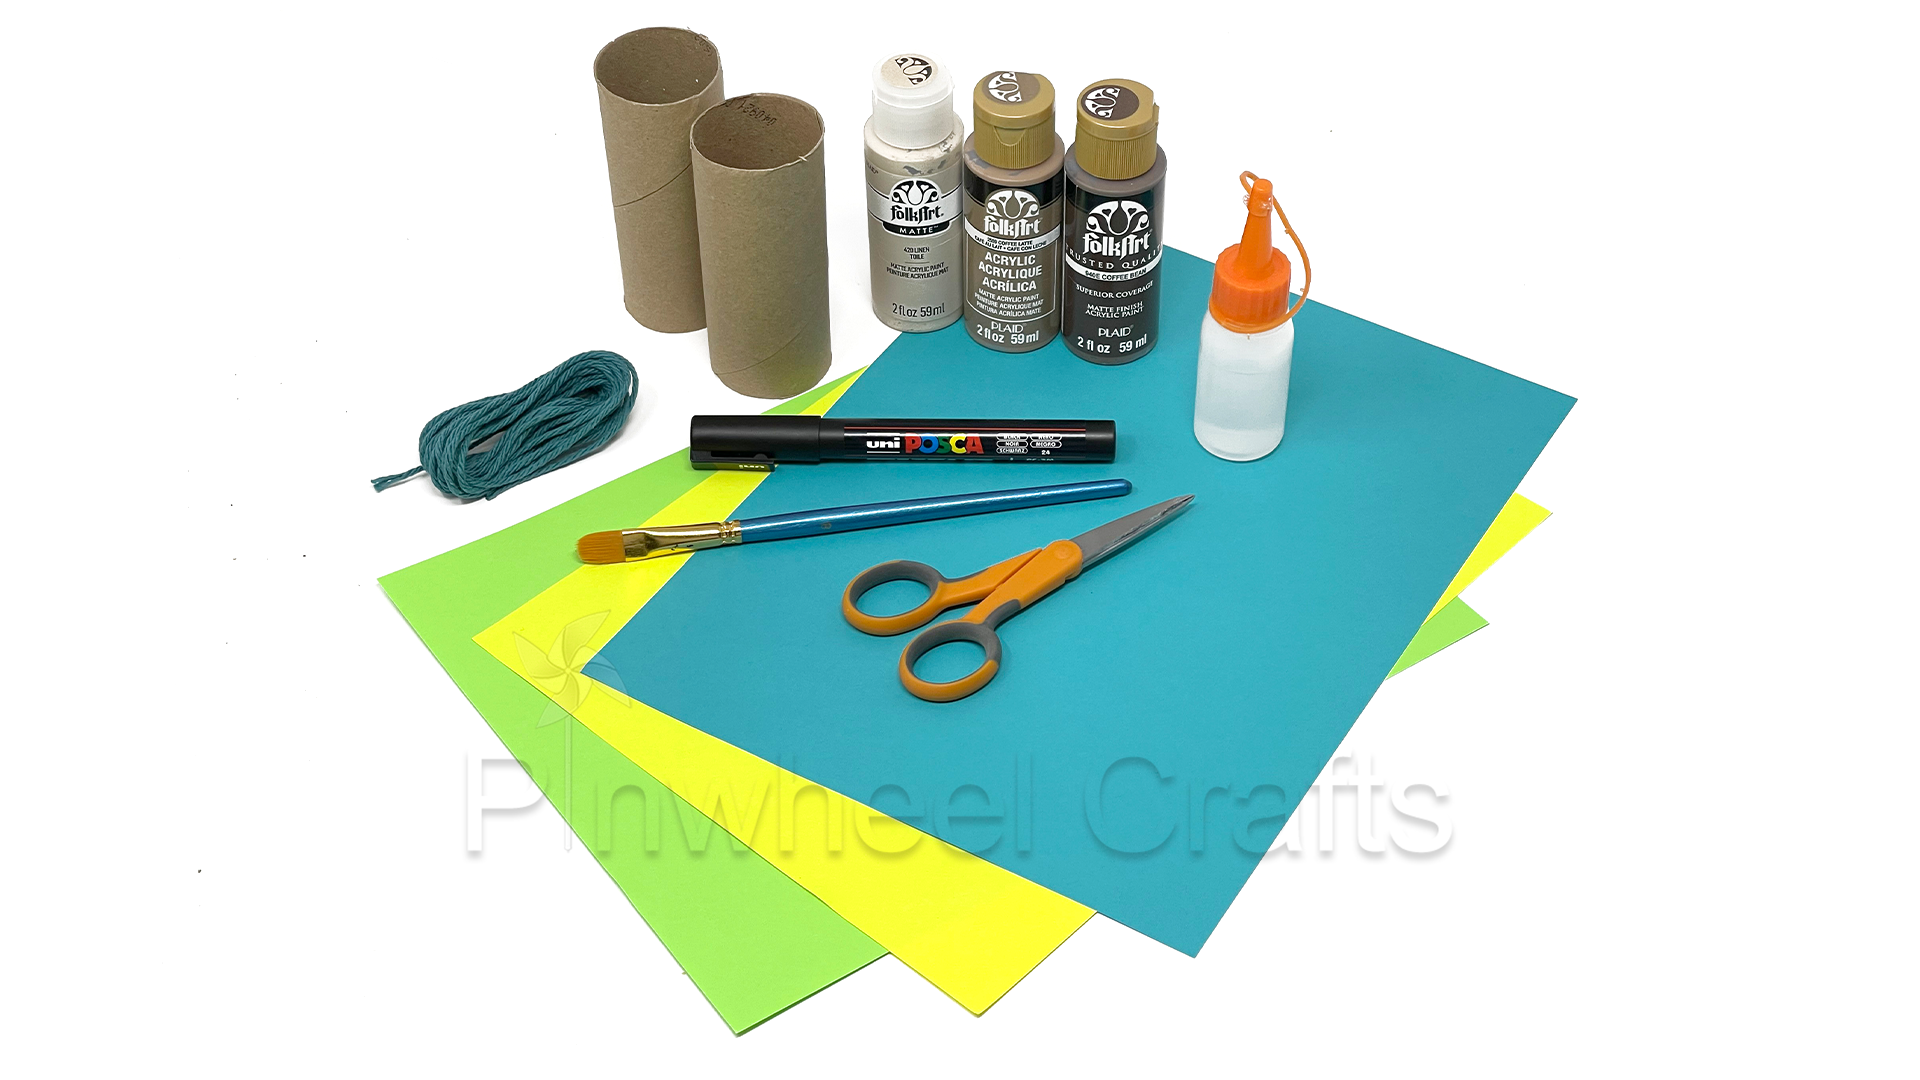 Pinwheel Crafts all in one kits and art supplies - Toilet paper roll crafts for up cycling wastes and reusing trash to make cute mermaid toys and decorations with Indoor crafts to keep kids busy this summer, fun crafts for kids, mermaid projects for girls